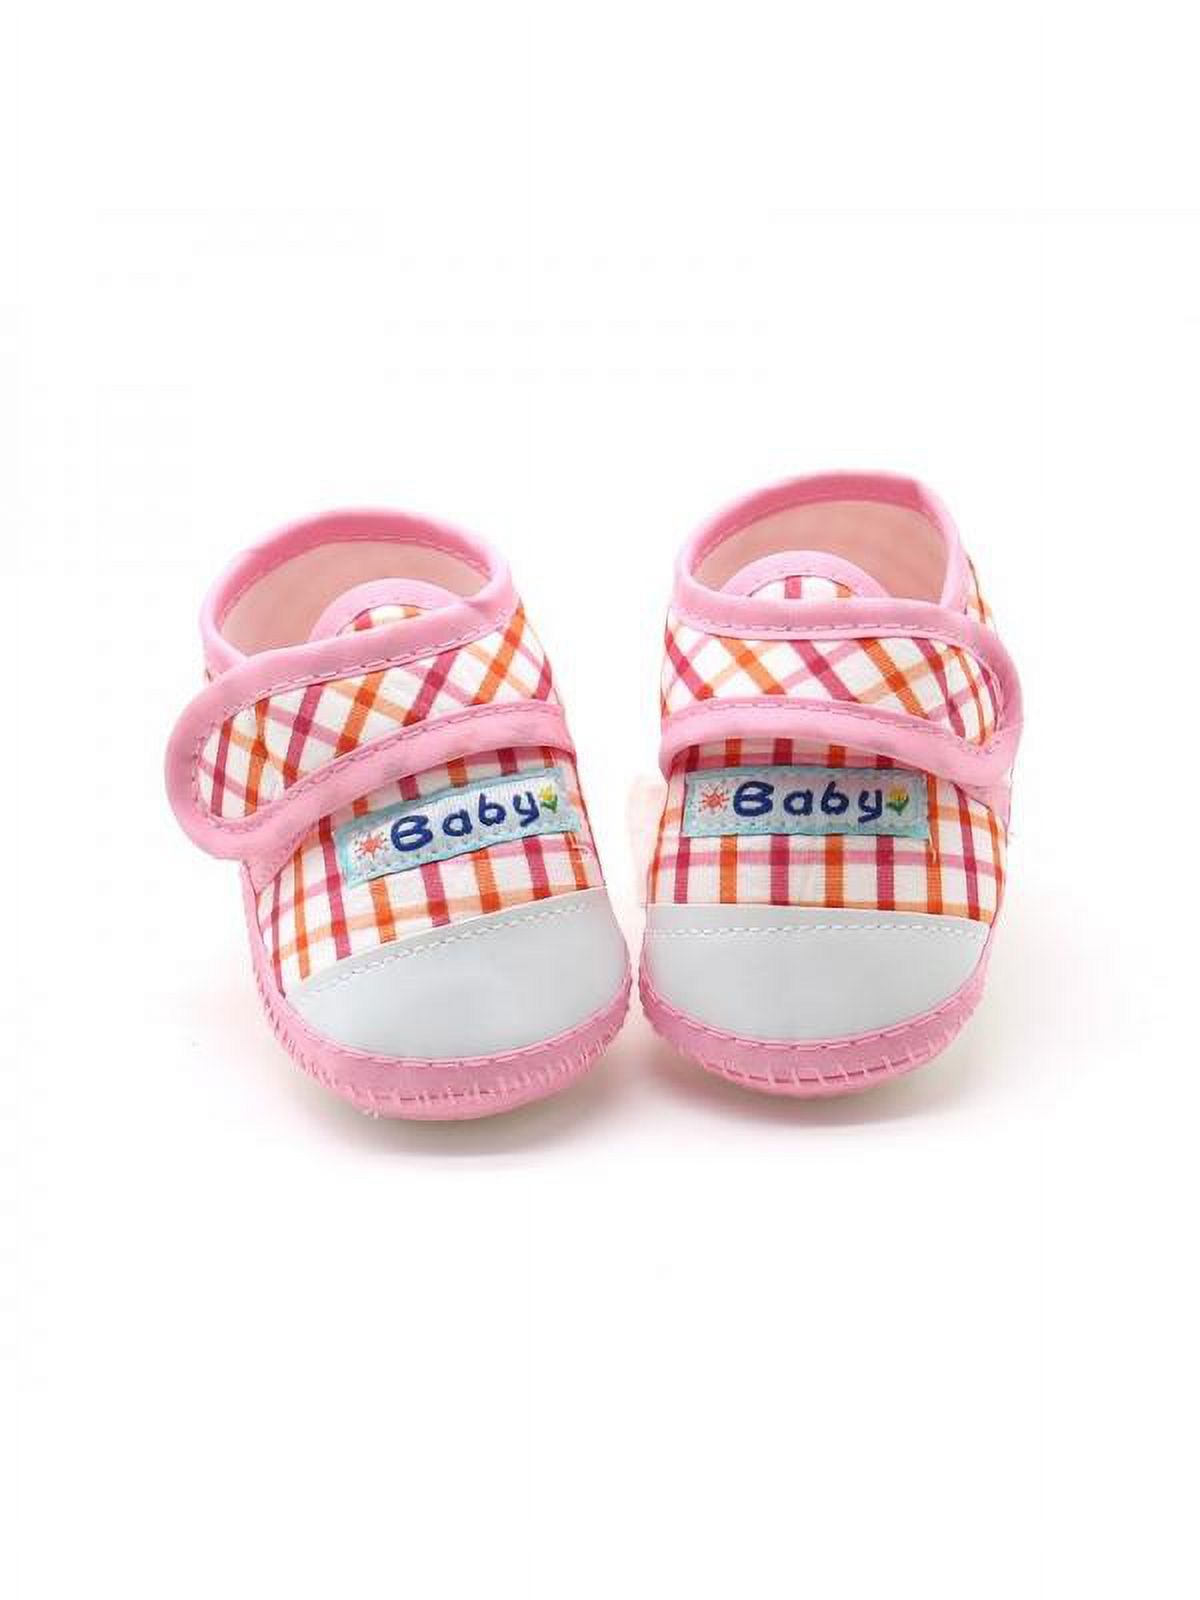 Baby Toddler Girl Boy Shoes Sneakers Soft Sole First Walker - image 4 of 8